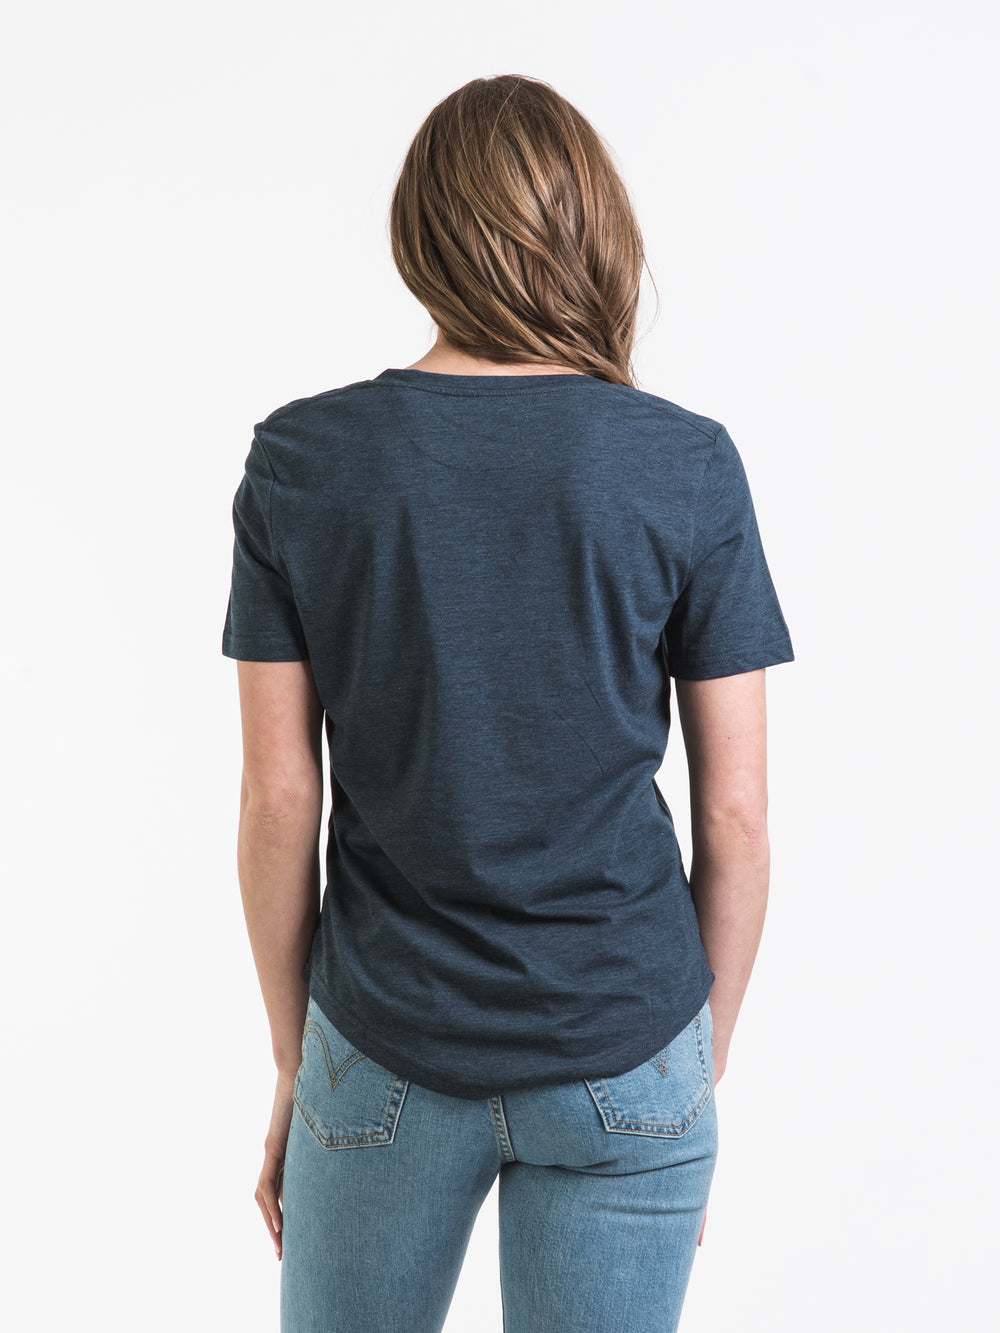 TENTREE VNECK T-SHIRT - CLEARANCE